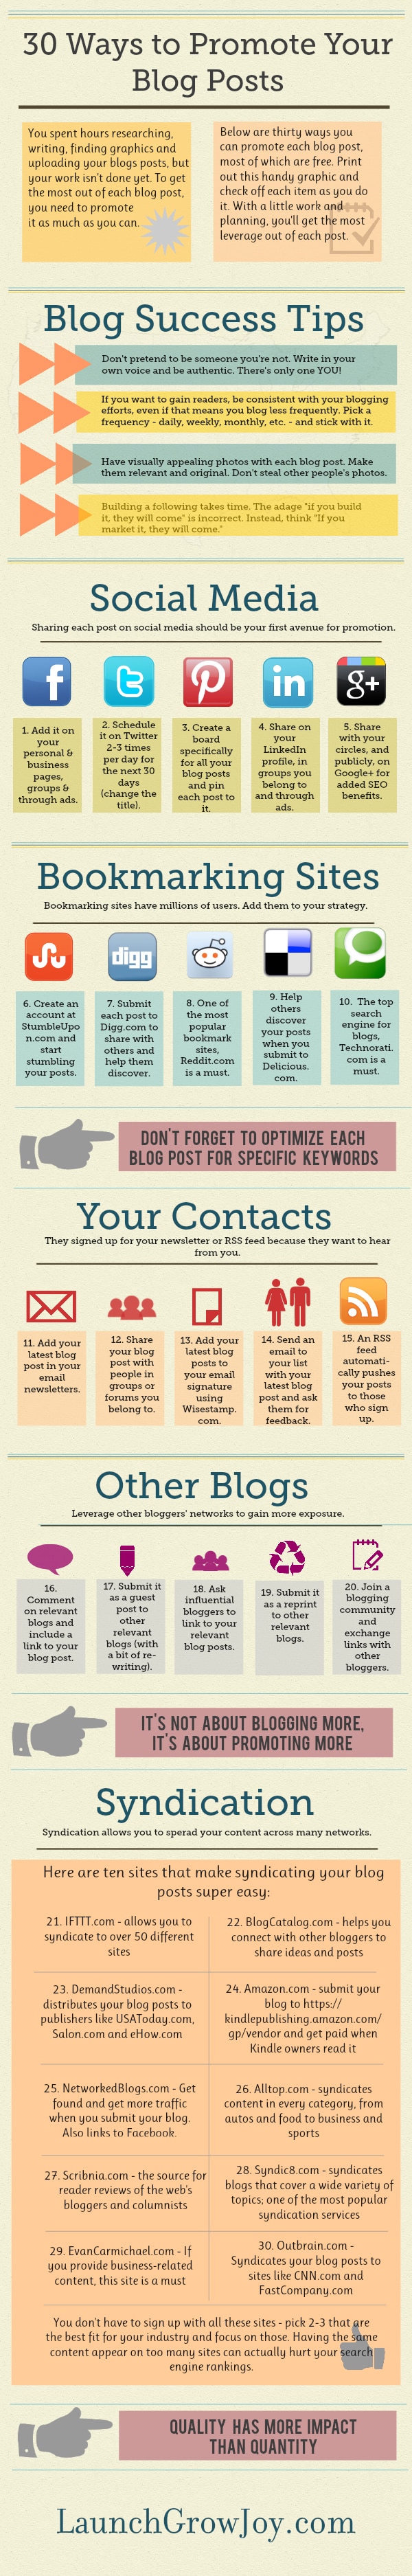 30 Ways To Promote Your Blog Posts In 2013 [Infographic]